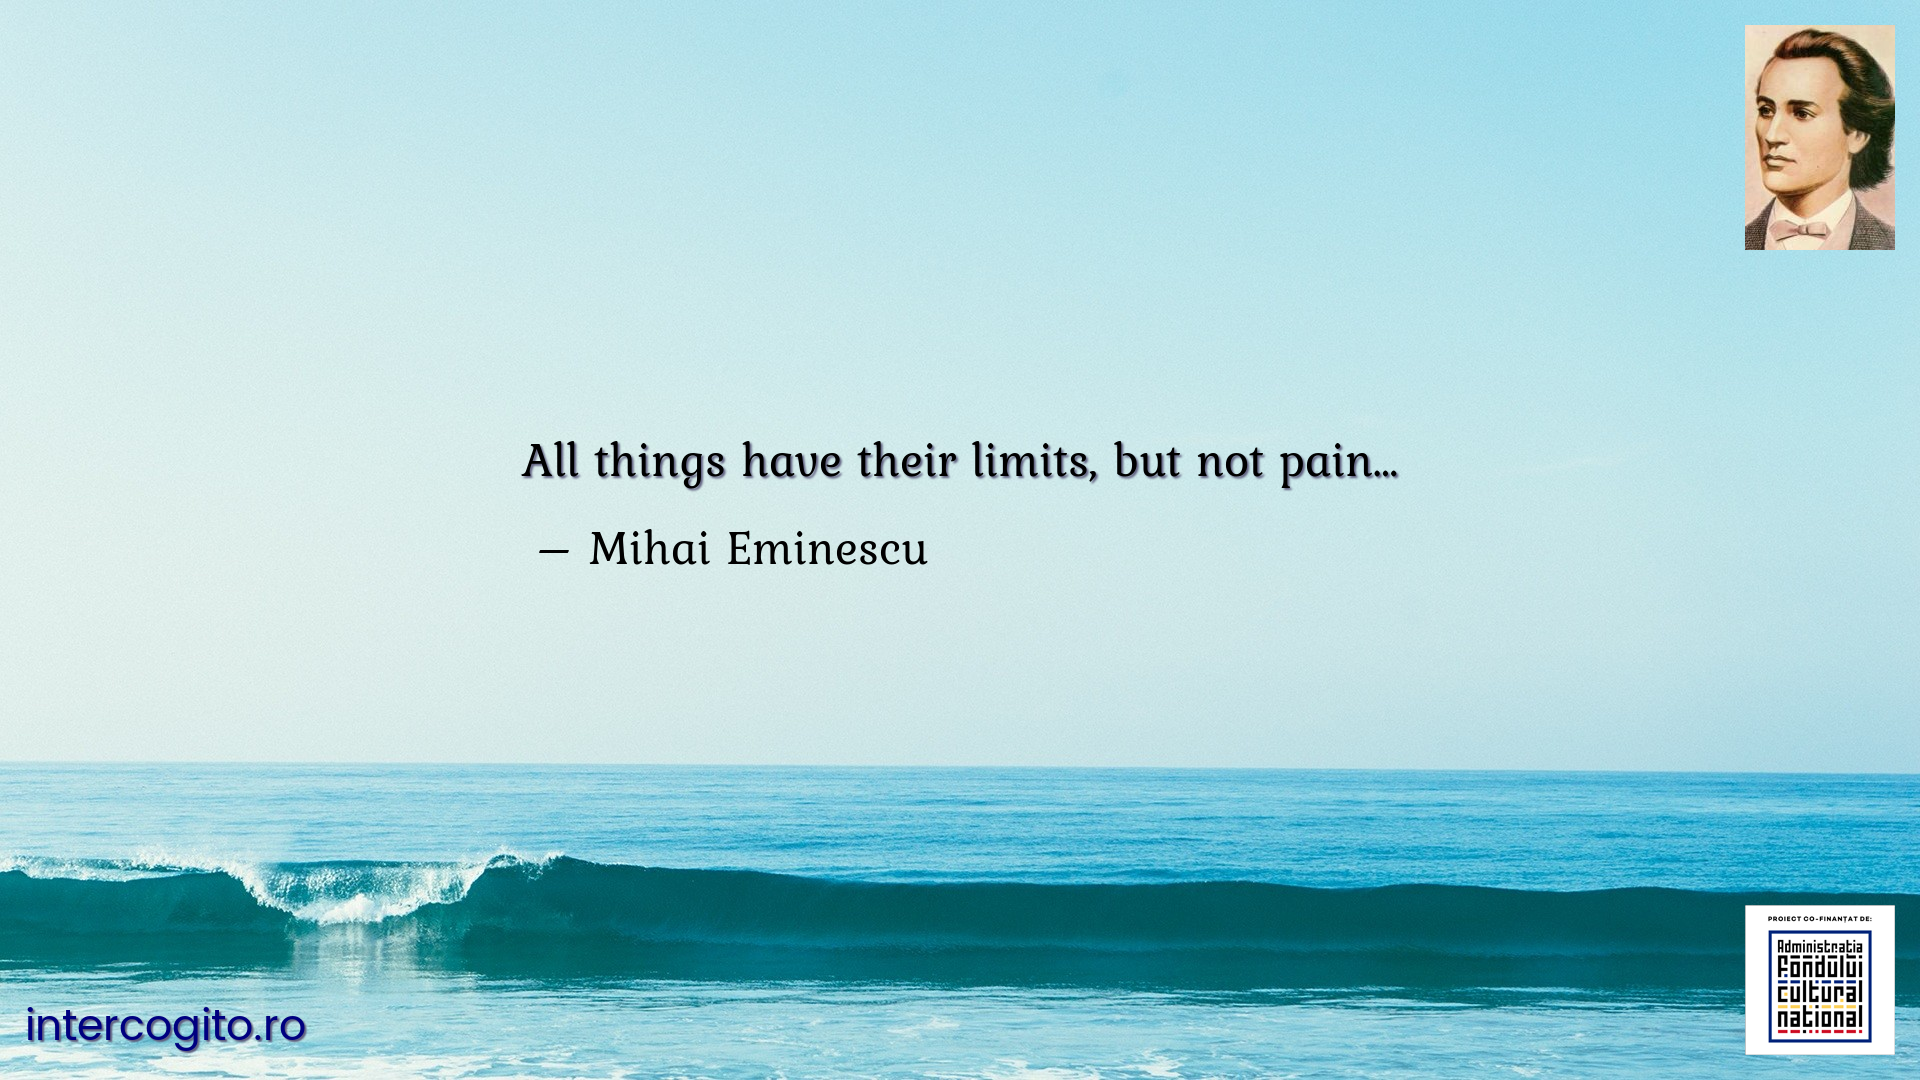 All things have their limits, but not pain…